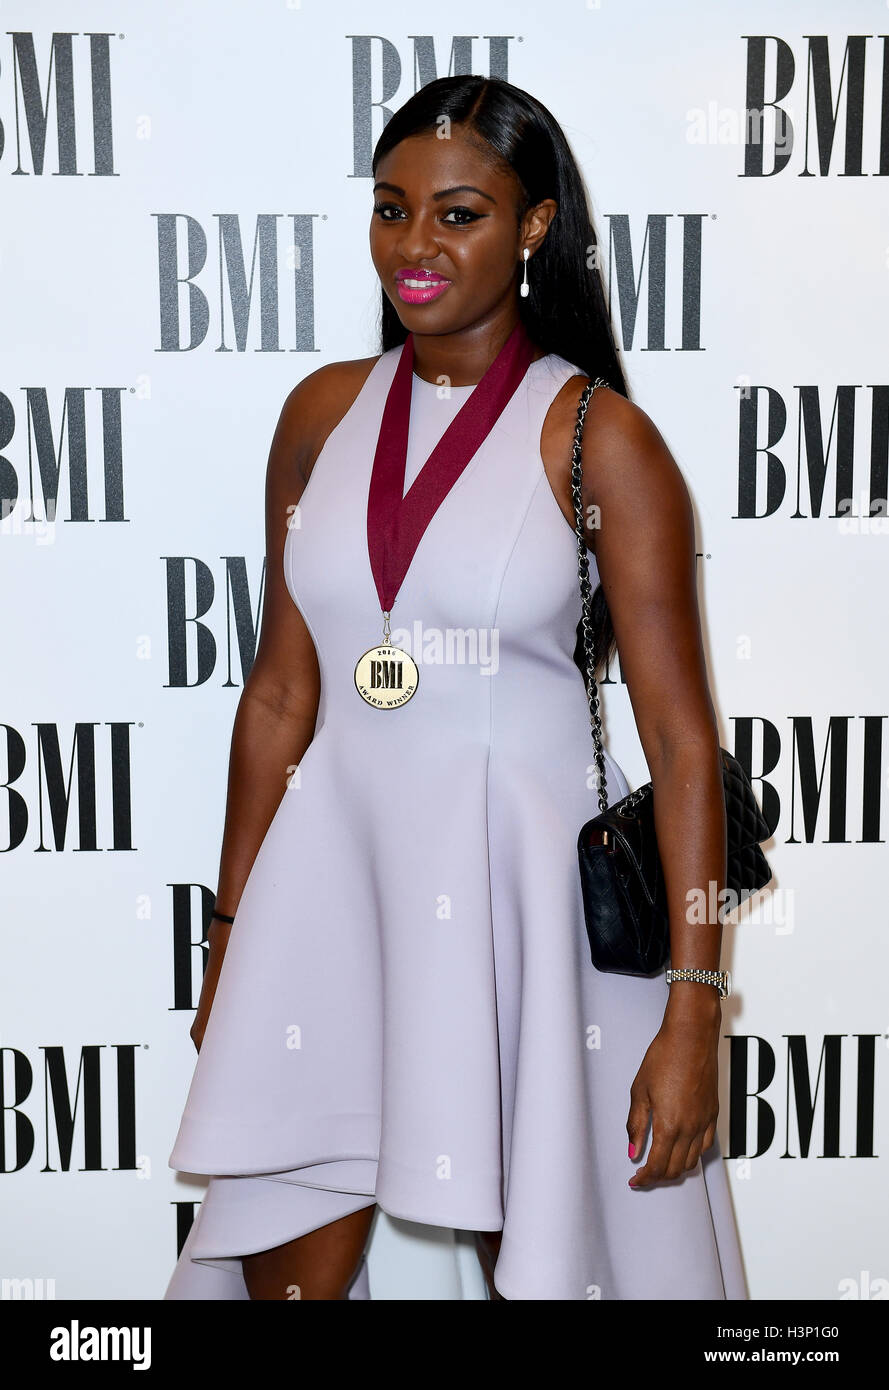 Janee Bennett attending the BMI London Awards at the Dorchester Hotel, London. Stock Photo